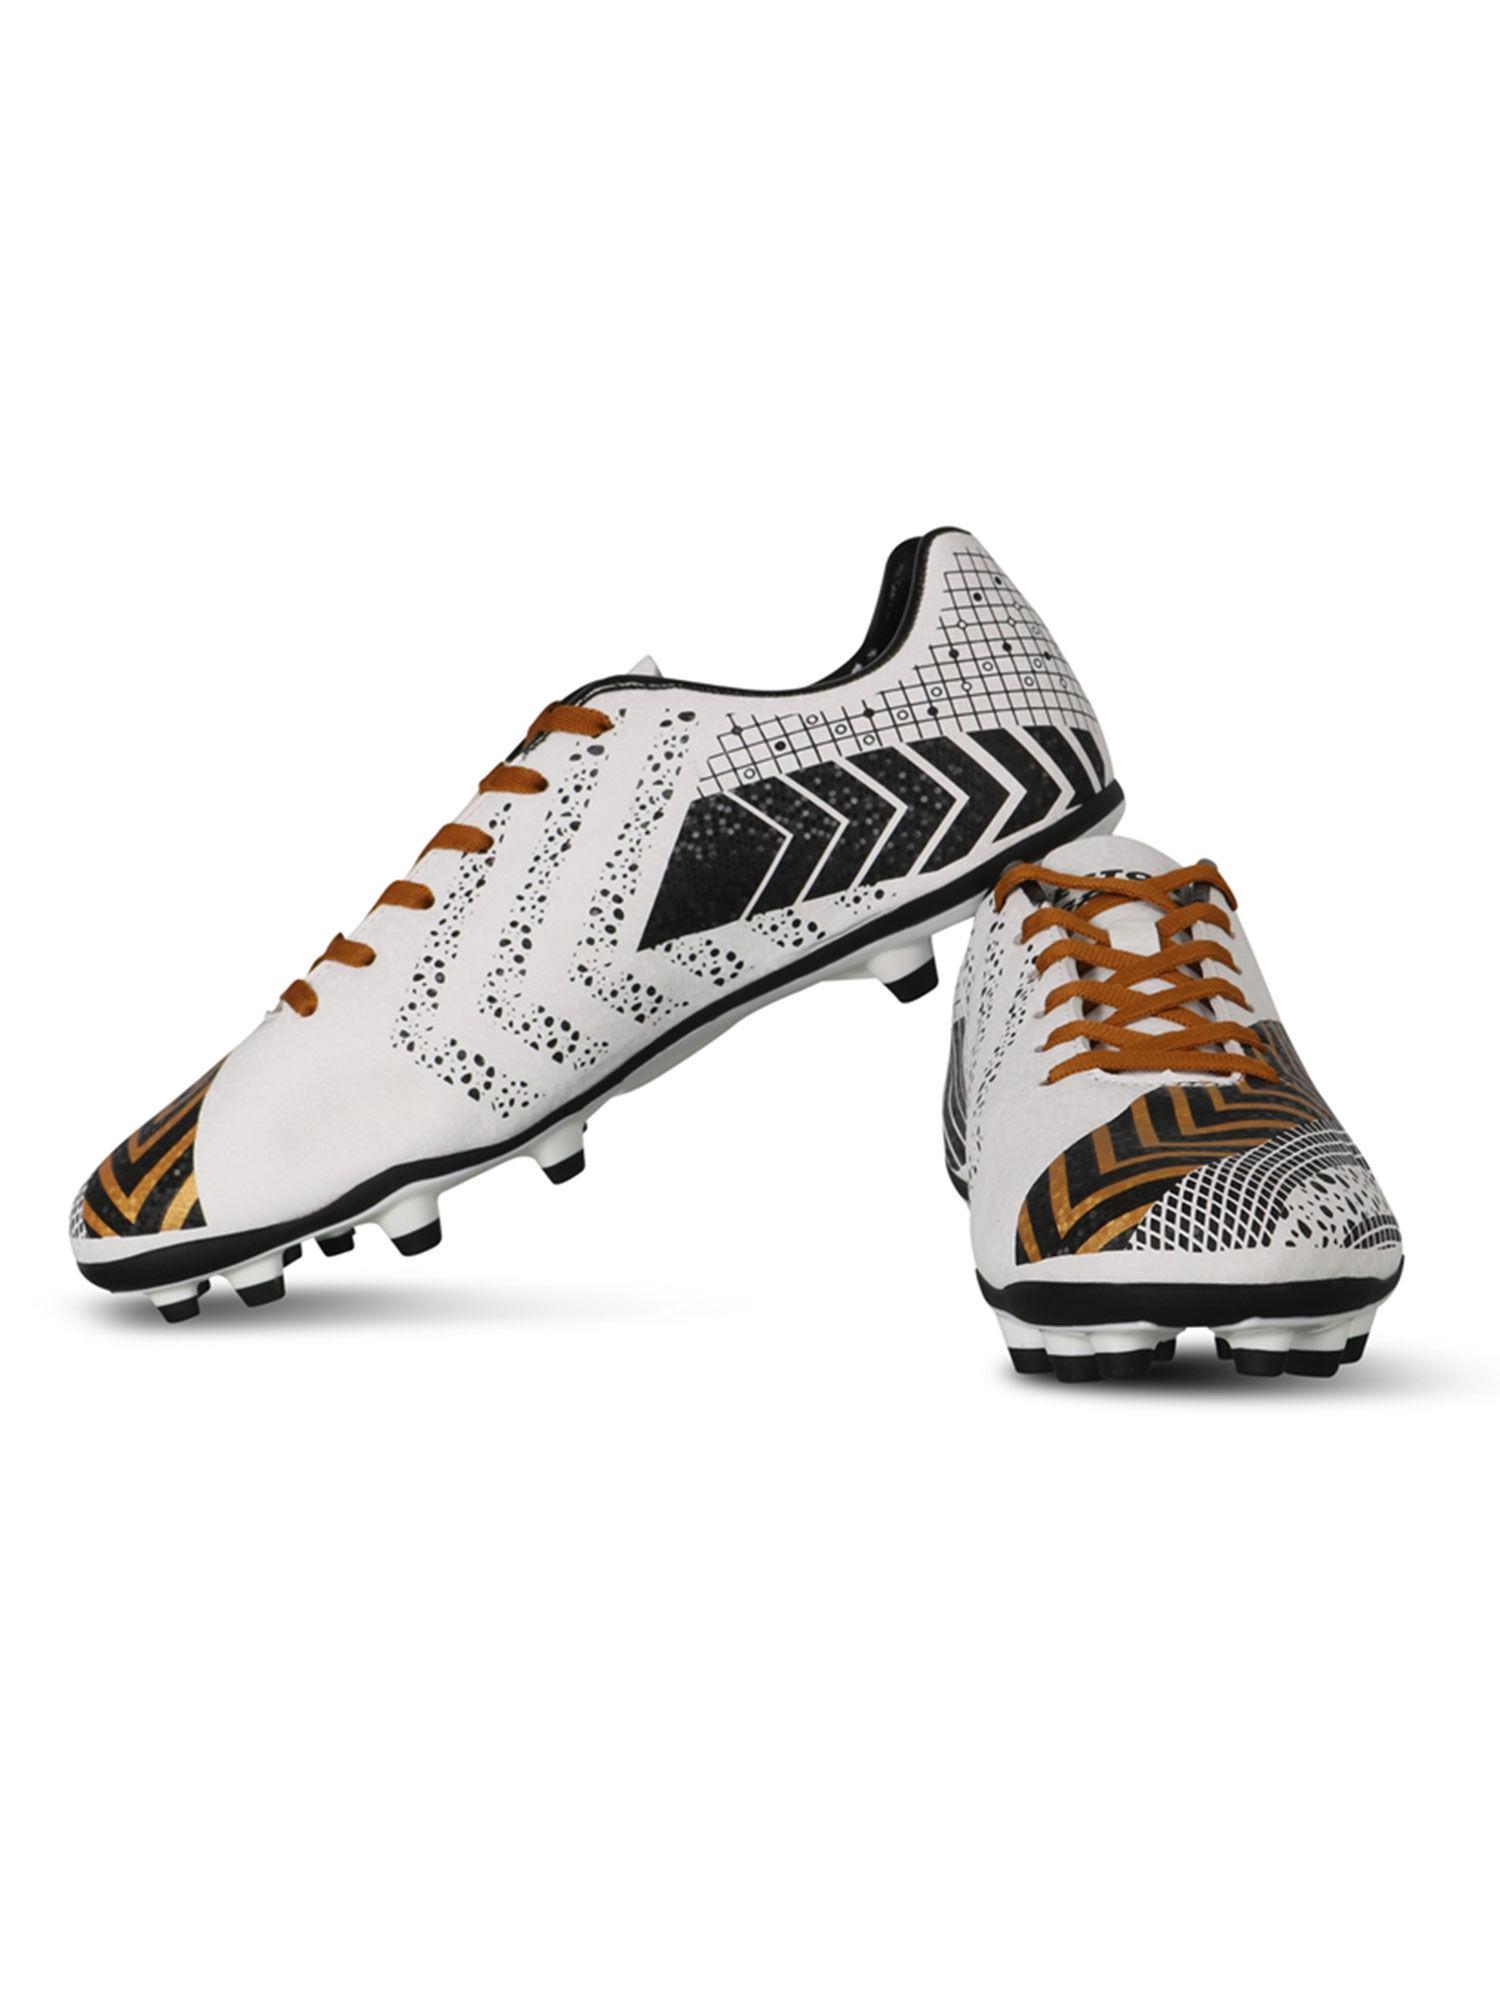 men gravity football shoe and studs